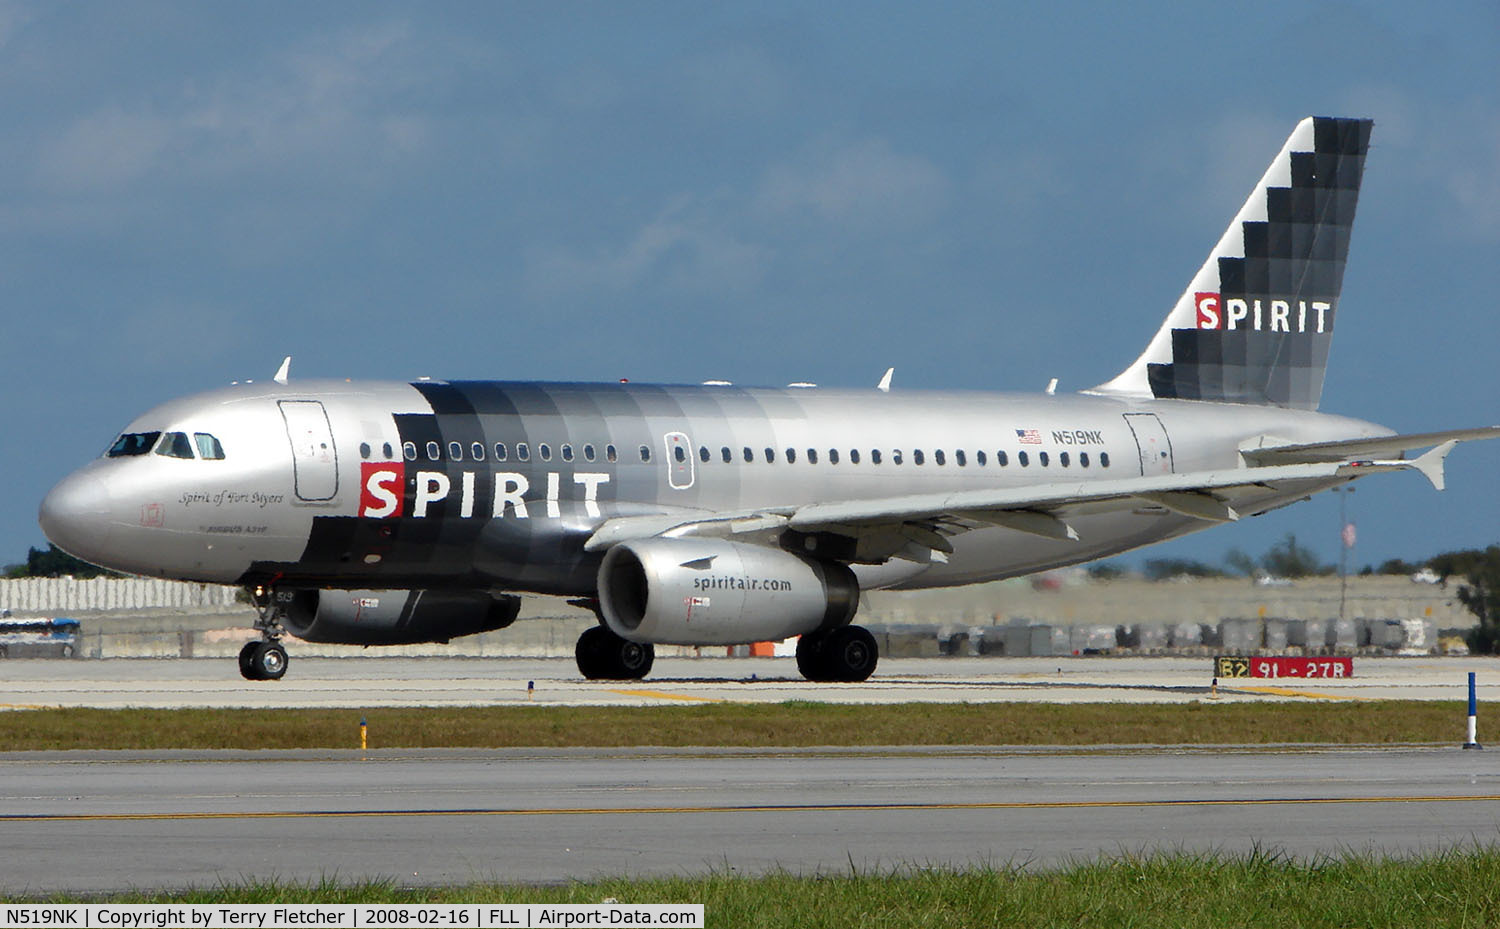 N519NK, 2006 Airbus A319-132 C/N 2723, Spirit A319 about to depart from FLL